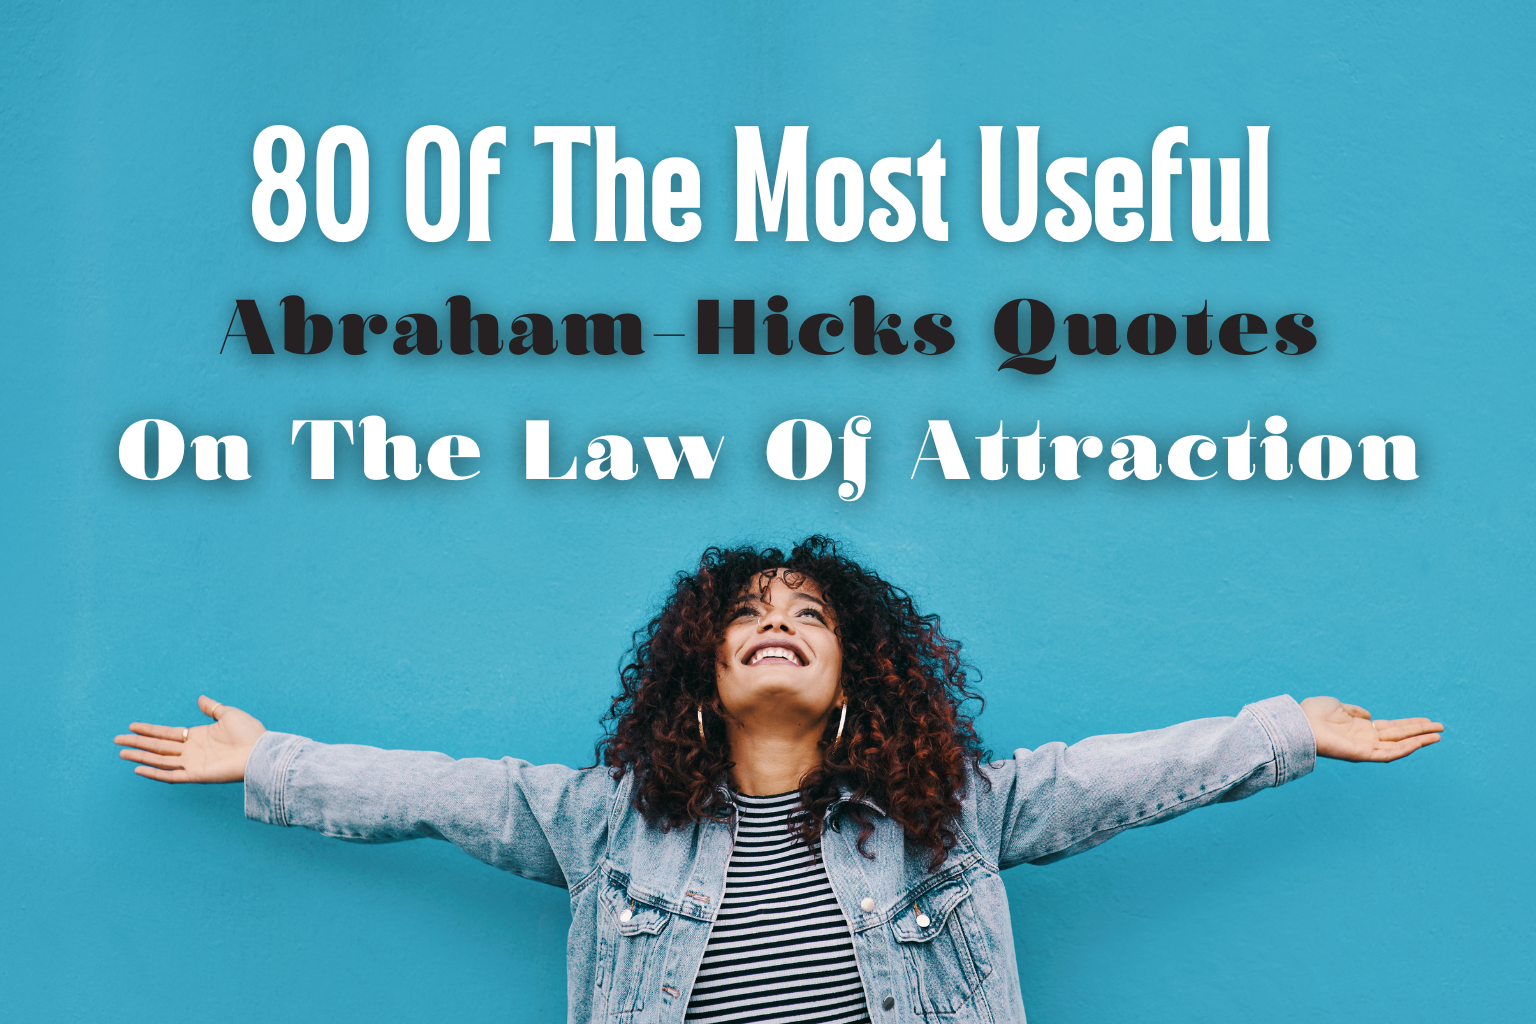 80 Of The Most Useful Abraham Hicks Quotes On The Law Of Attraction